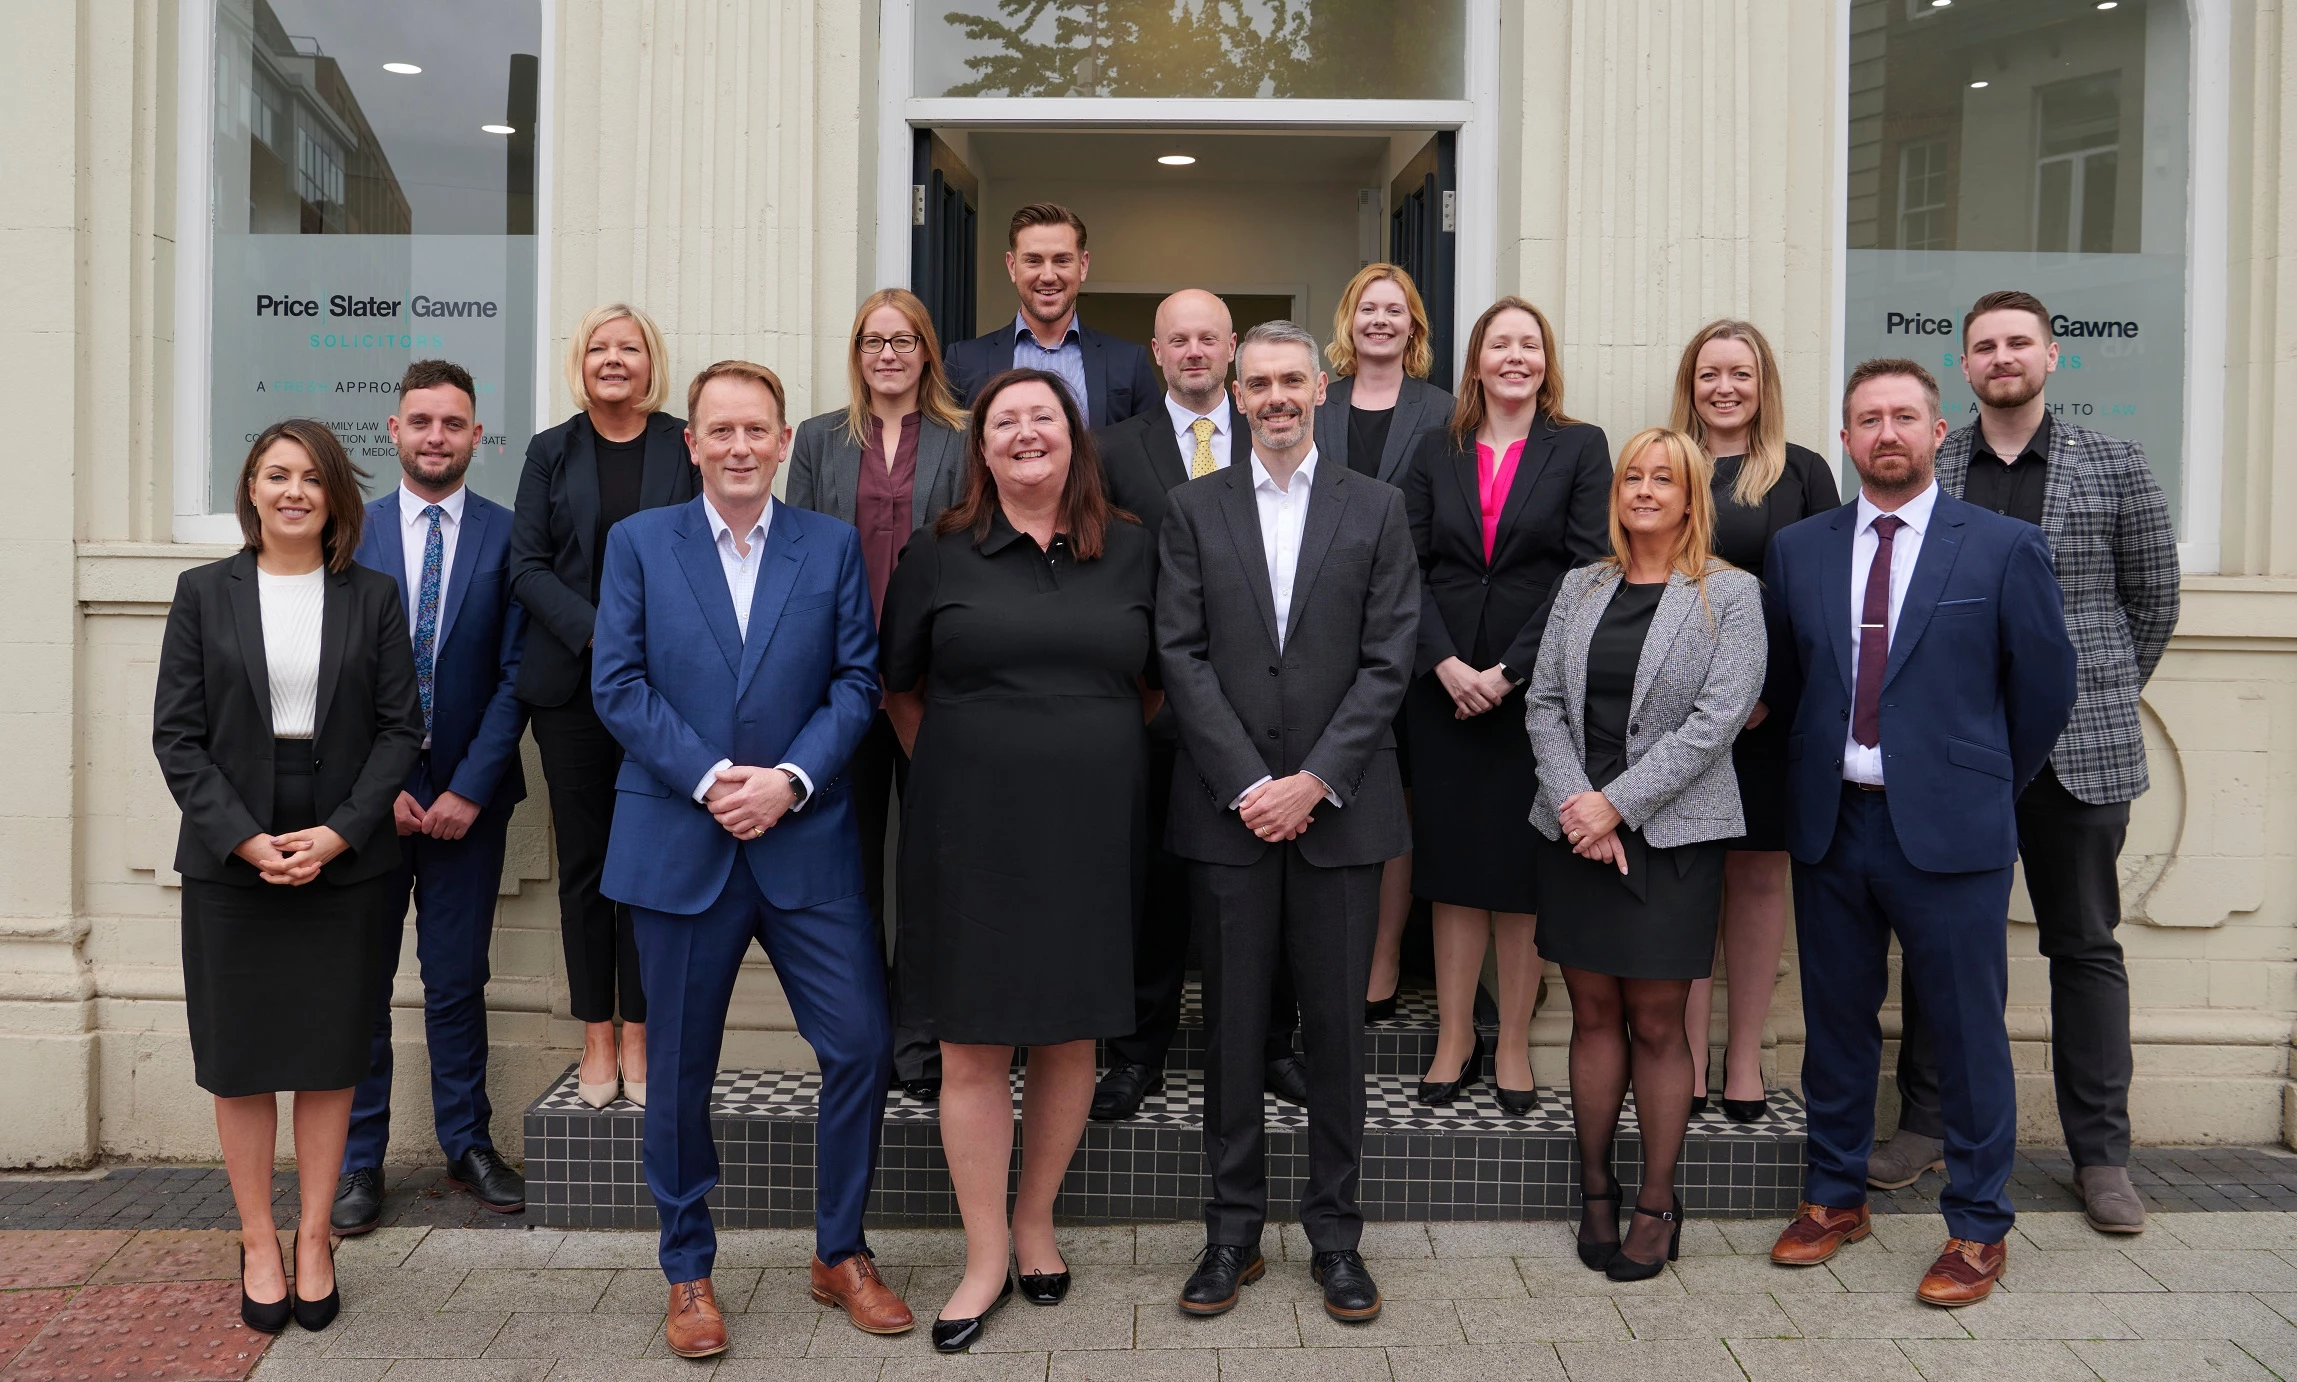 Price Slater Gawne announces 13 key promotions for staff who have made a significant contribution to its programme of strategic growth